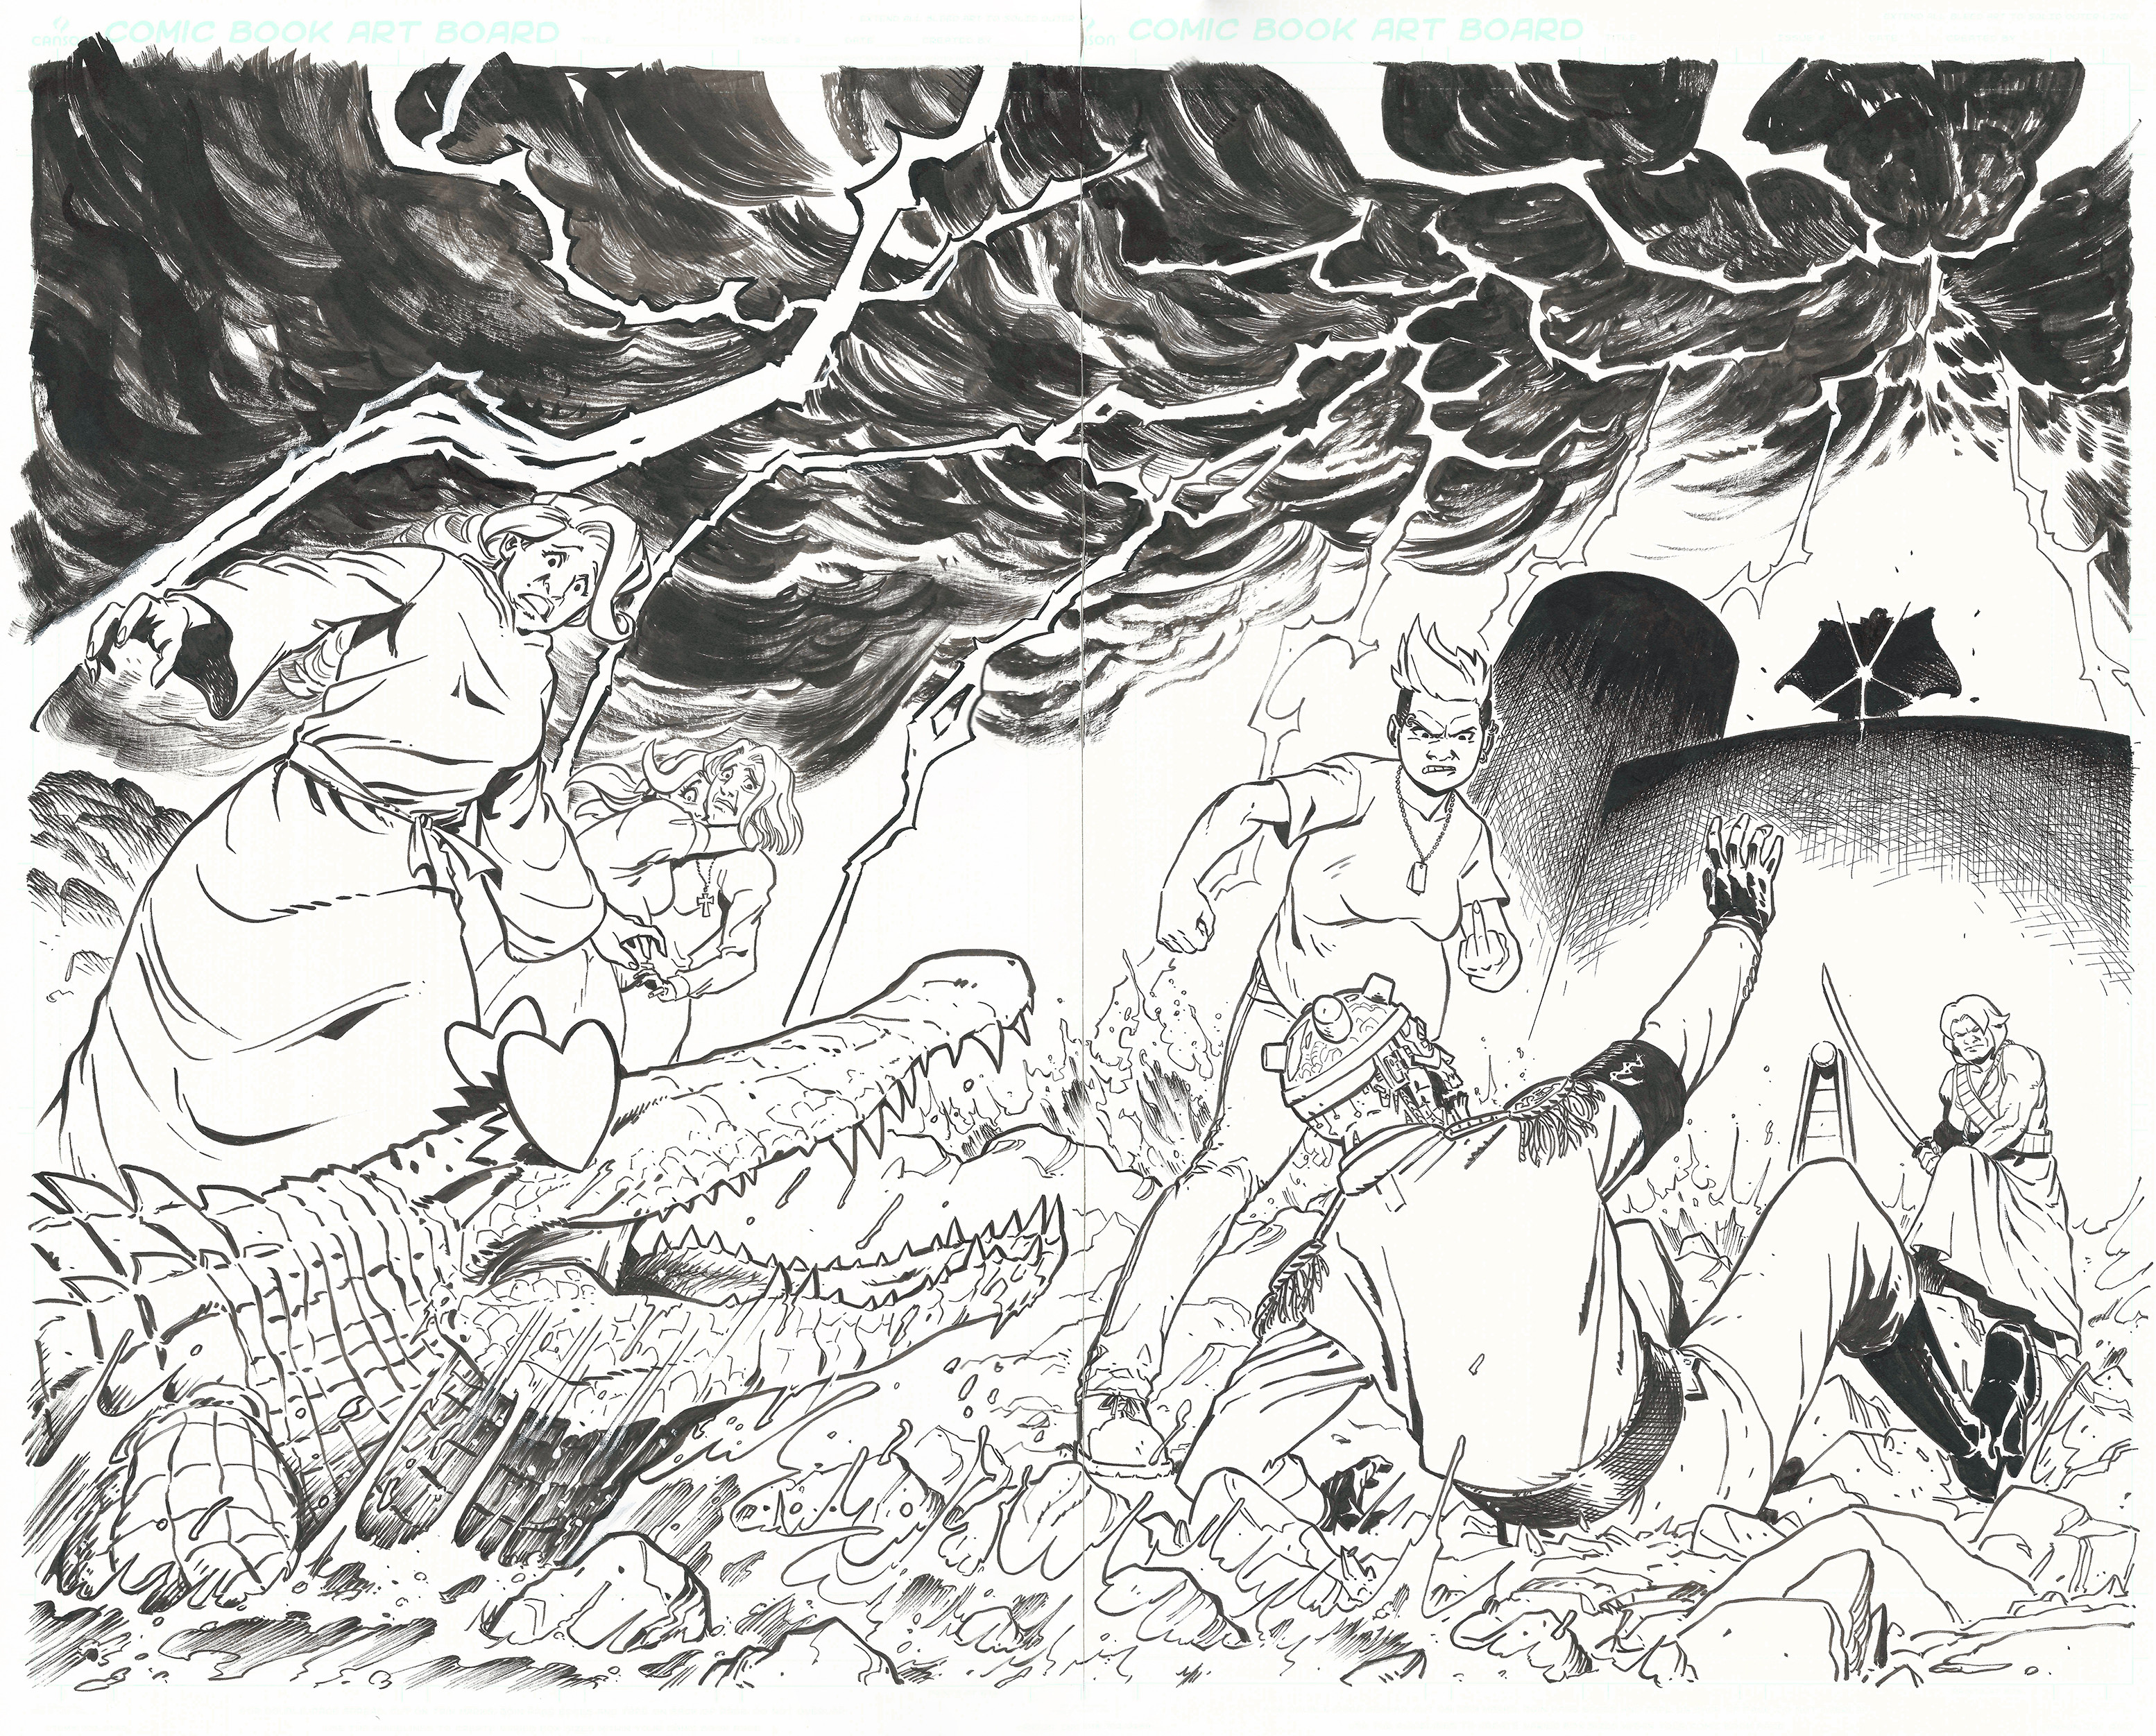 Unclean scan of the traditional inks on 2 comic books pages.